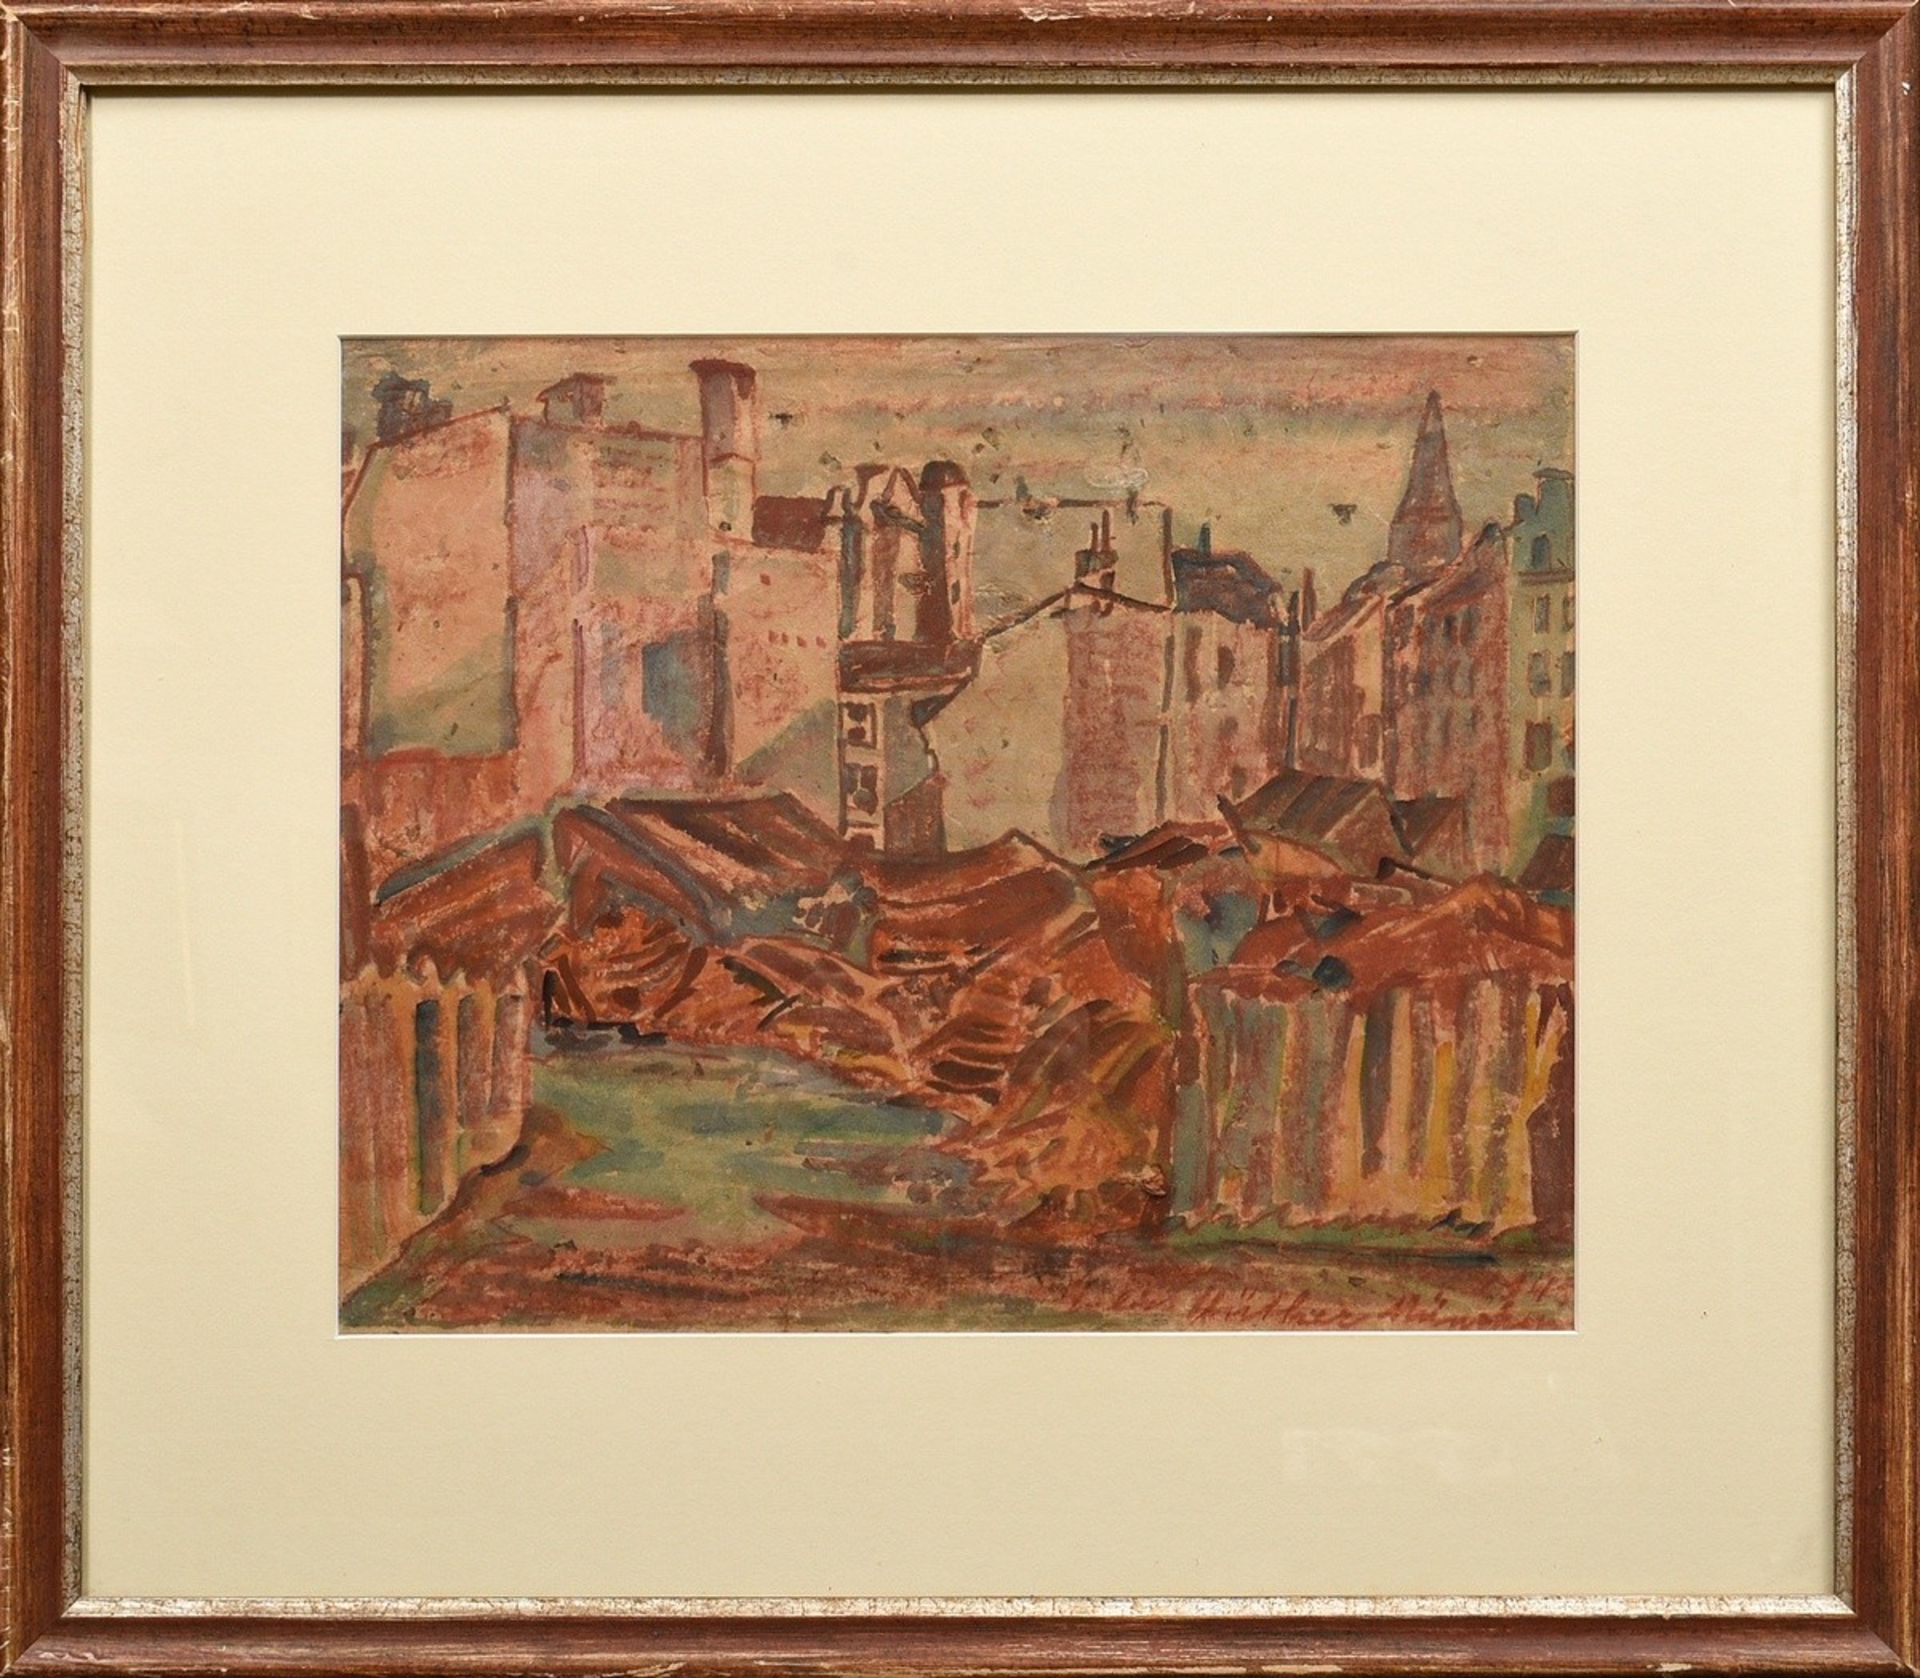 Hüther, Julius (1881-1954) "Houses and Ruins" (probably Munich) 1945(?), watercolour/coloured penci - Image 2 of 3